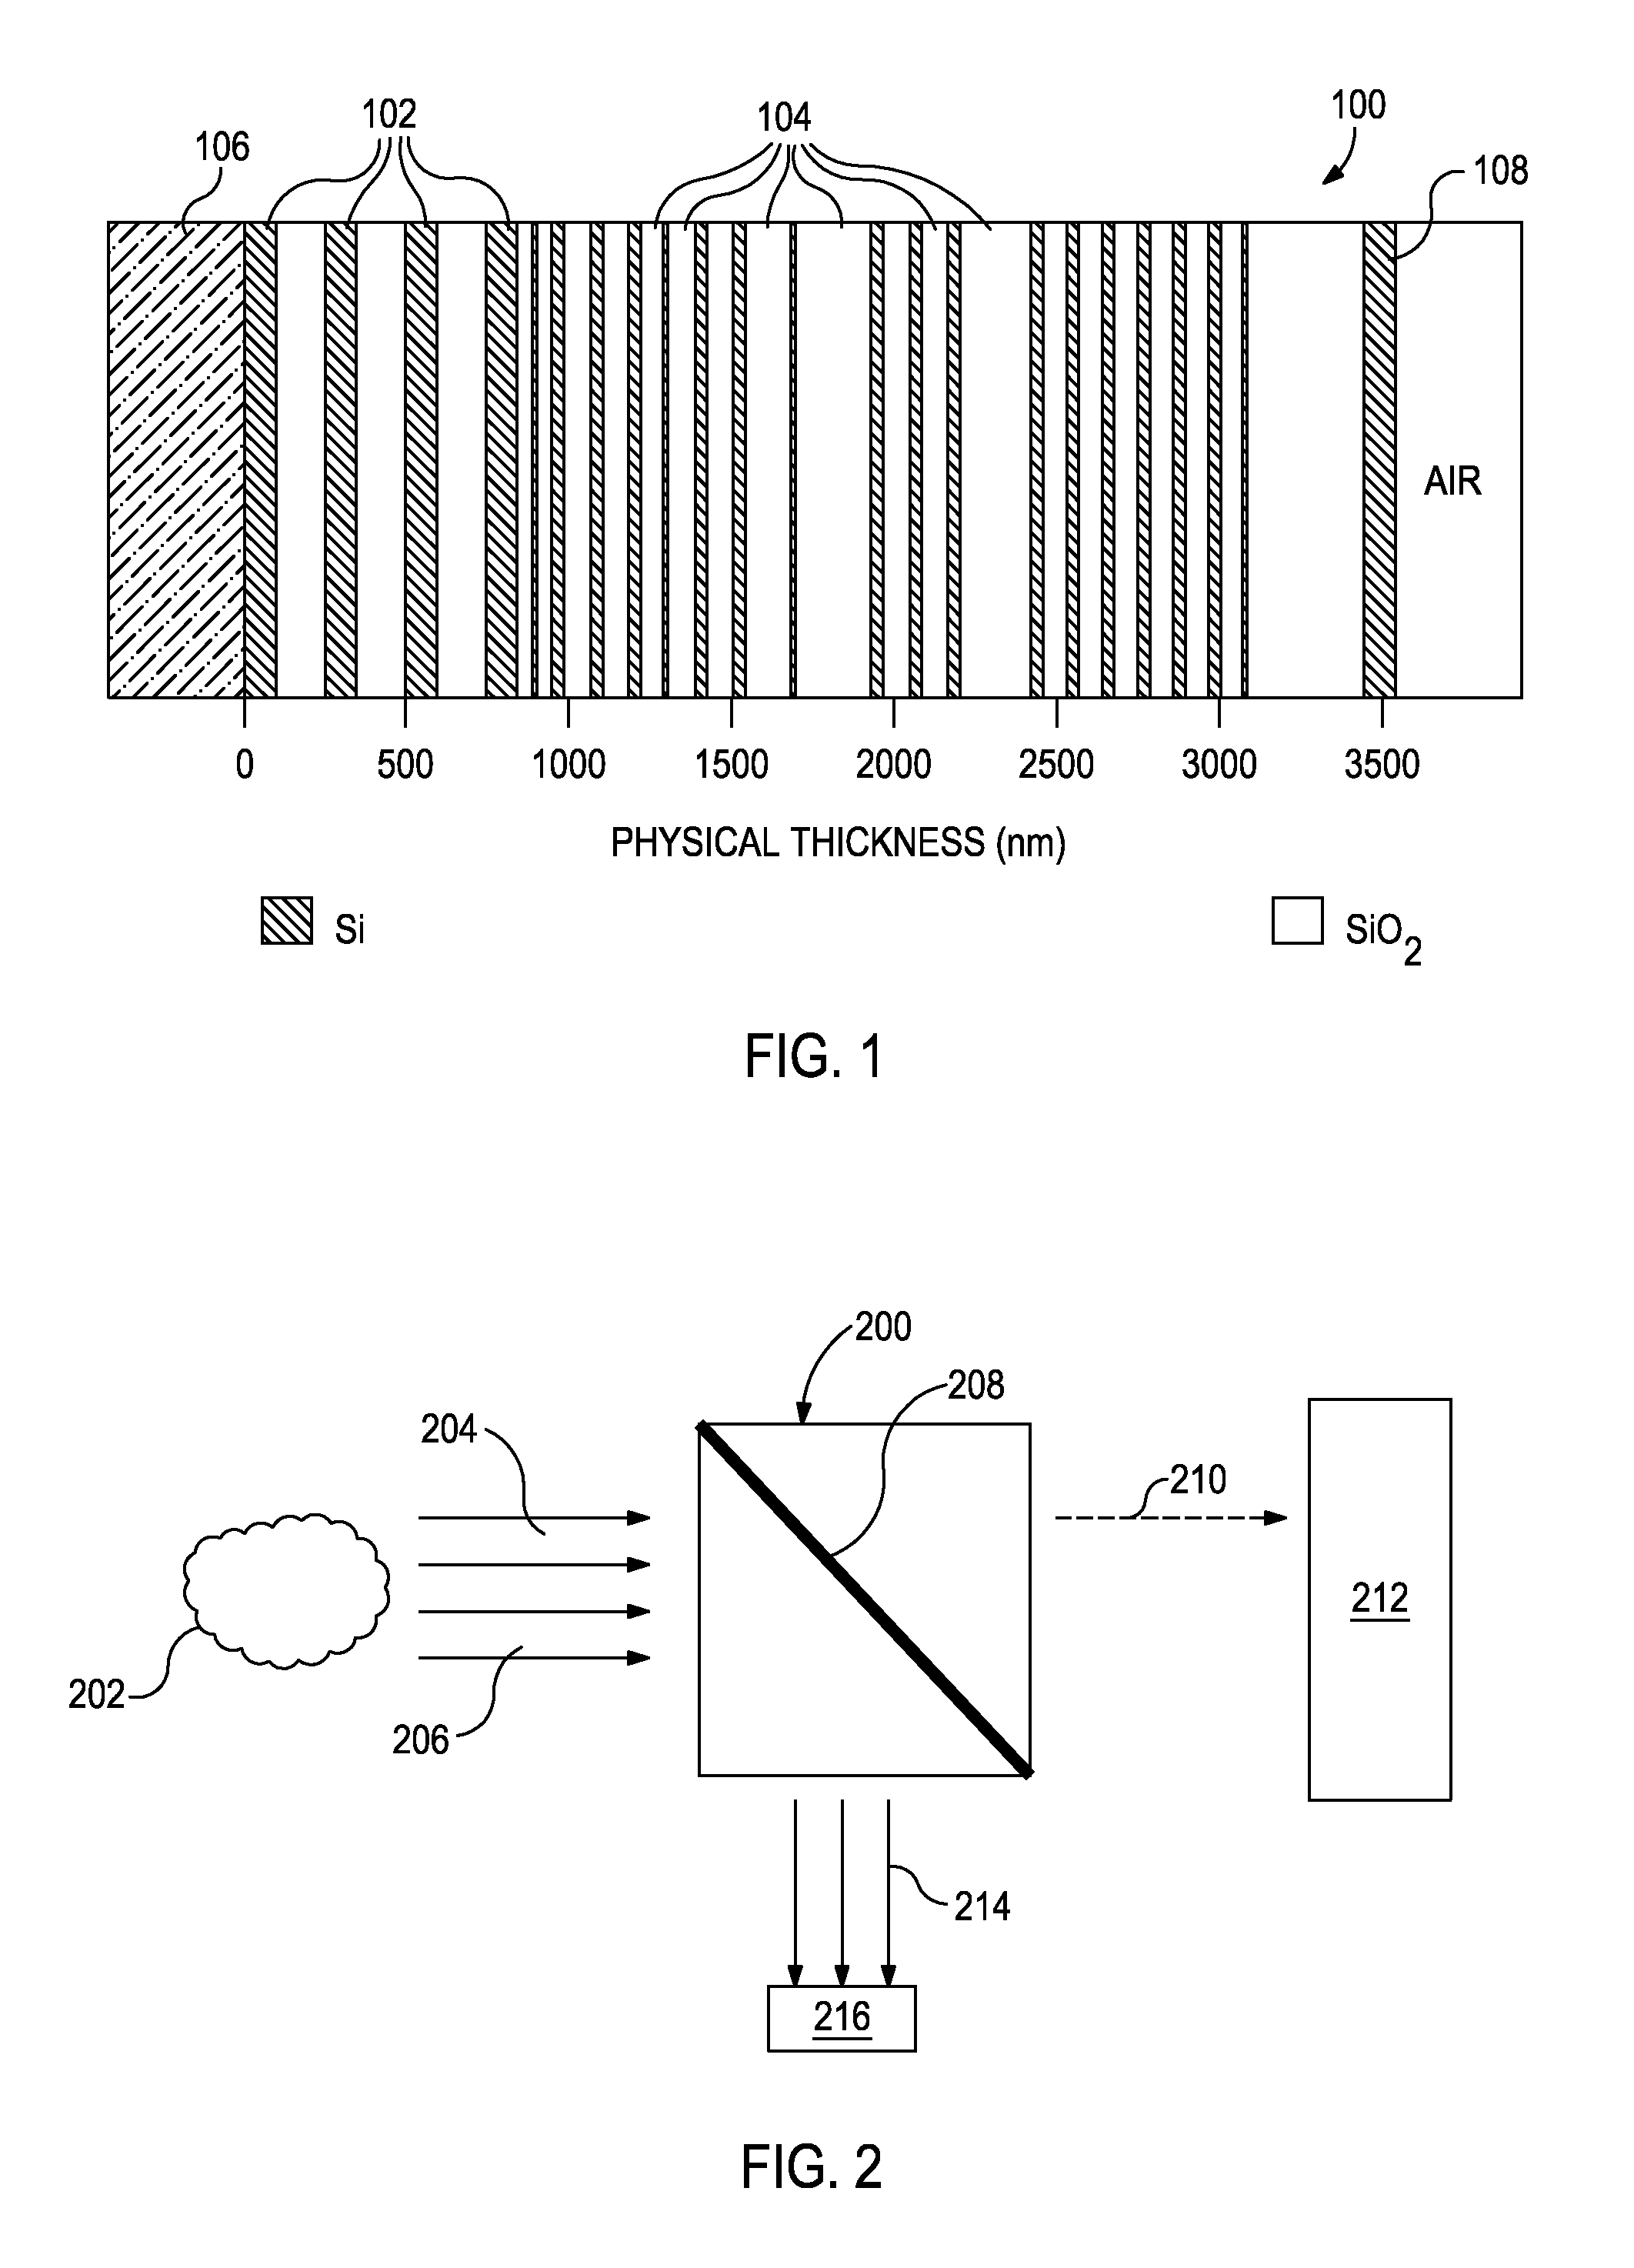 Systems and Methods for Analyzing Microbiological Substances